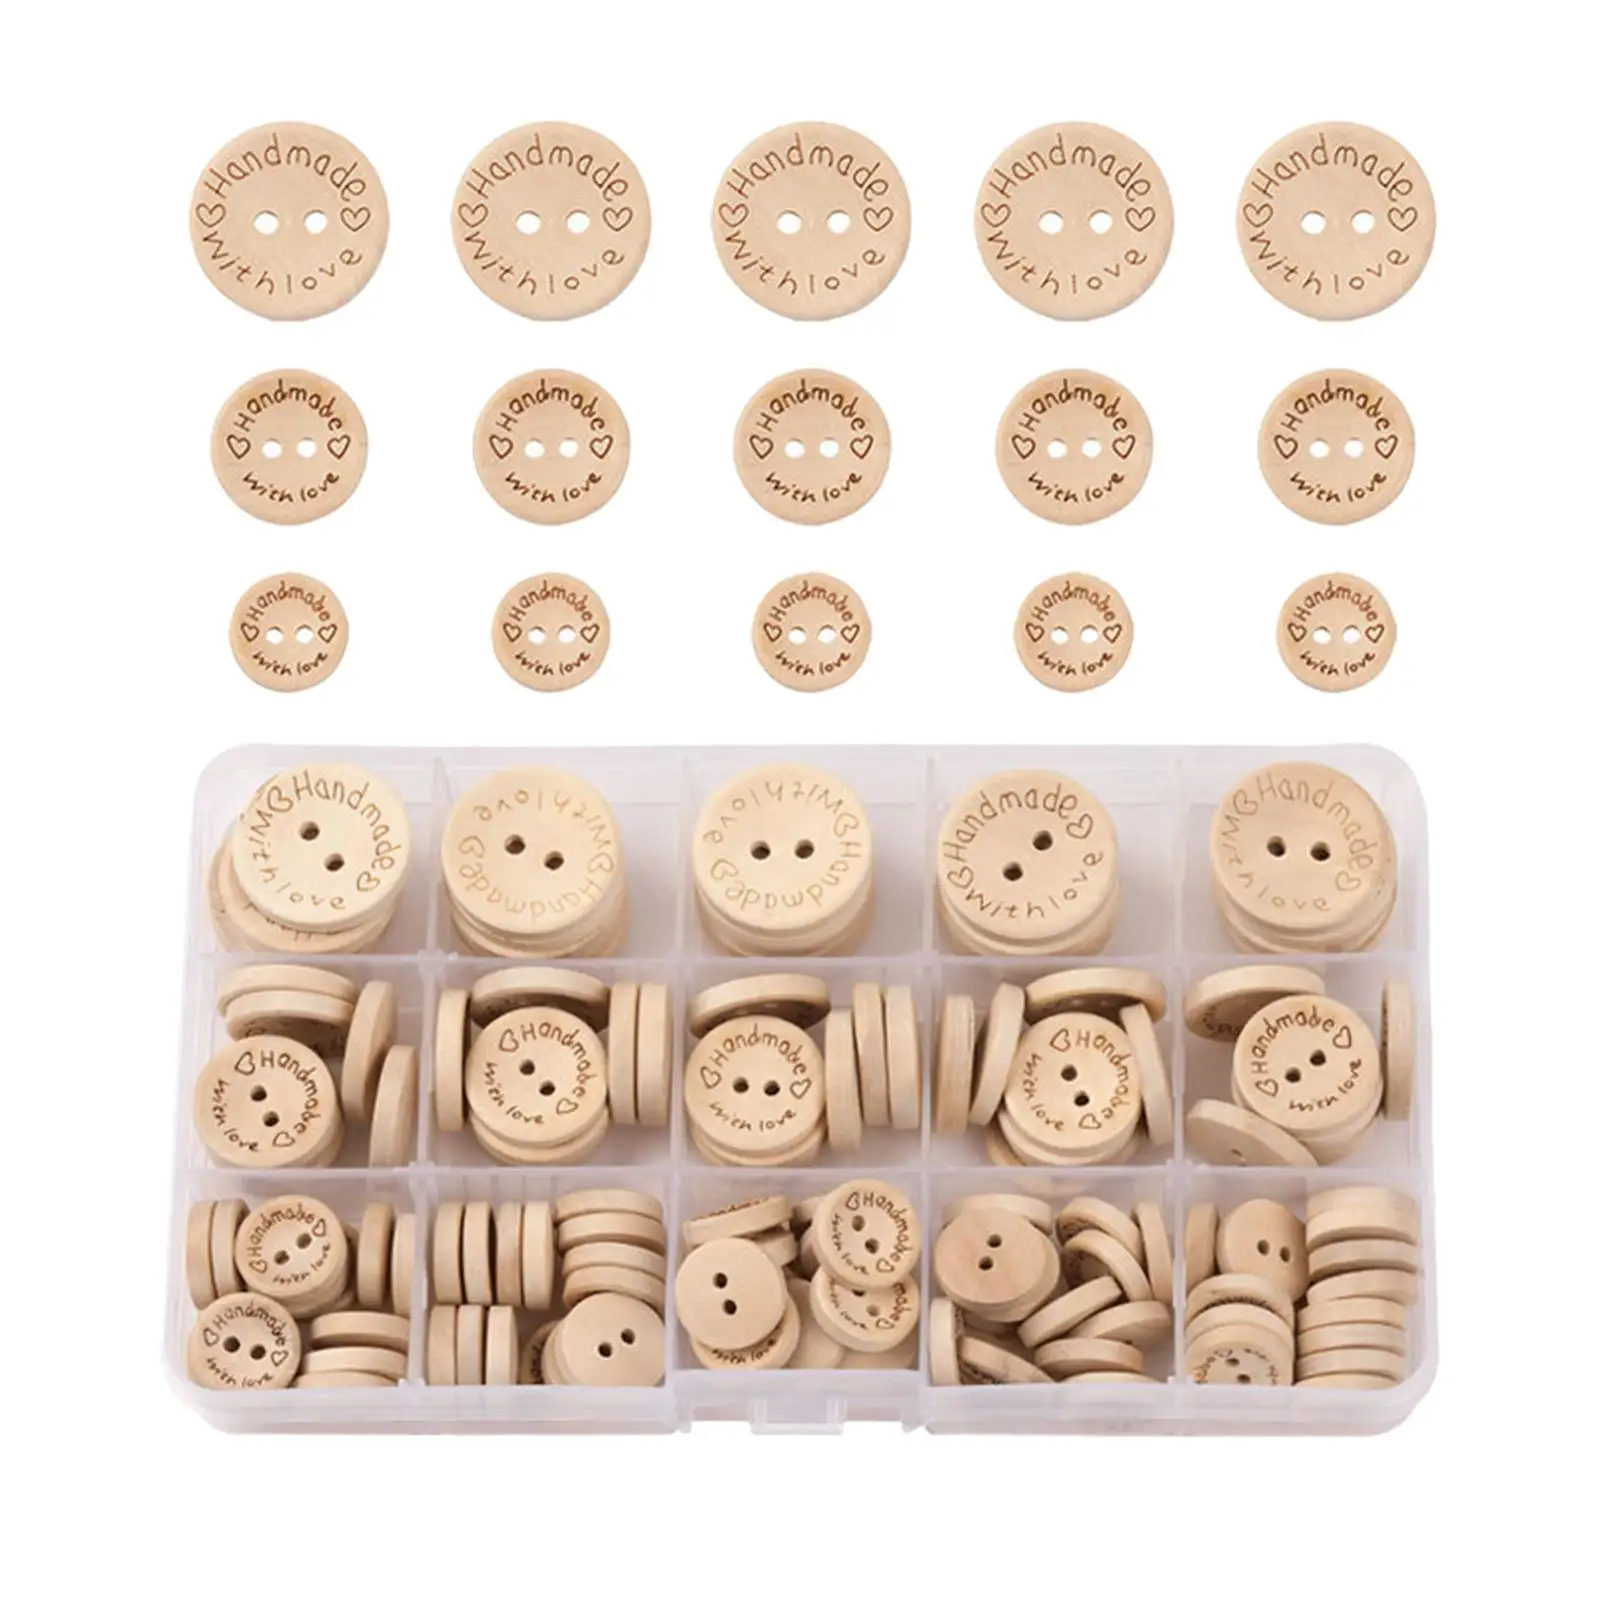 140x Wooden Handmade Buttons with Love Round Shape Sizes Mixed Crafts Sewing Buttons for Crocheting Card Making Knitting Decor